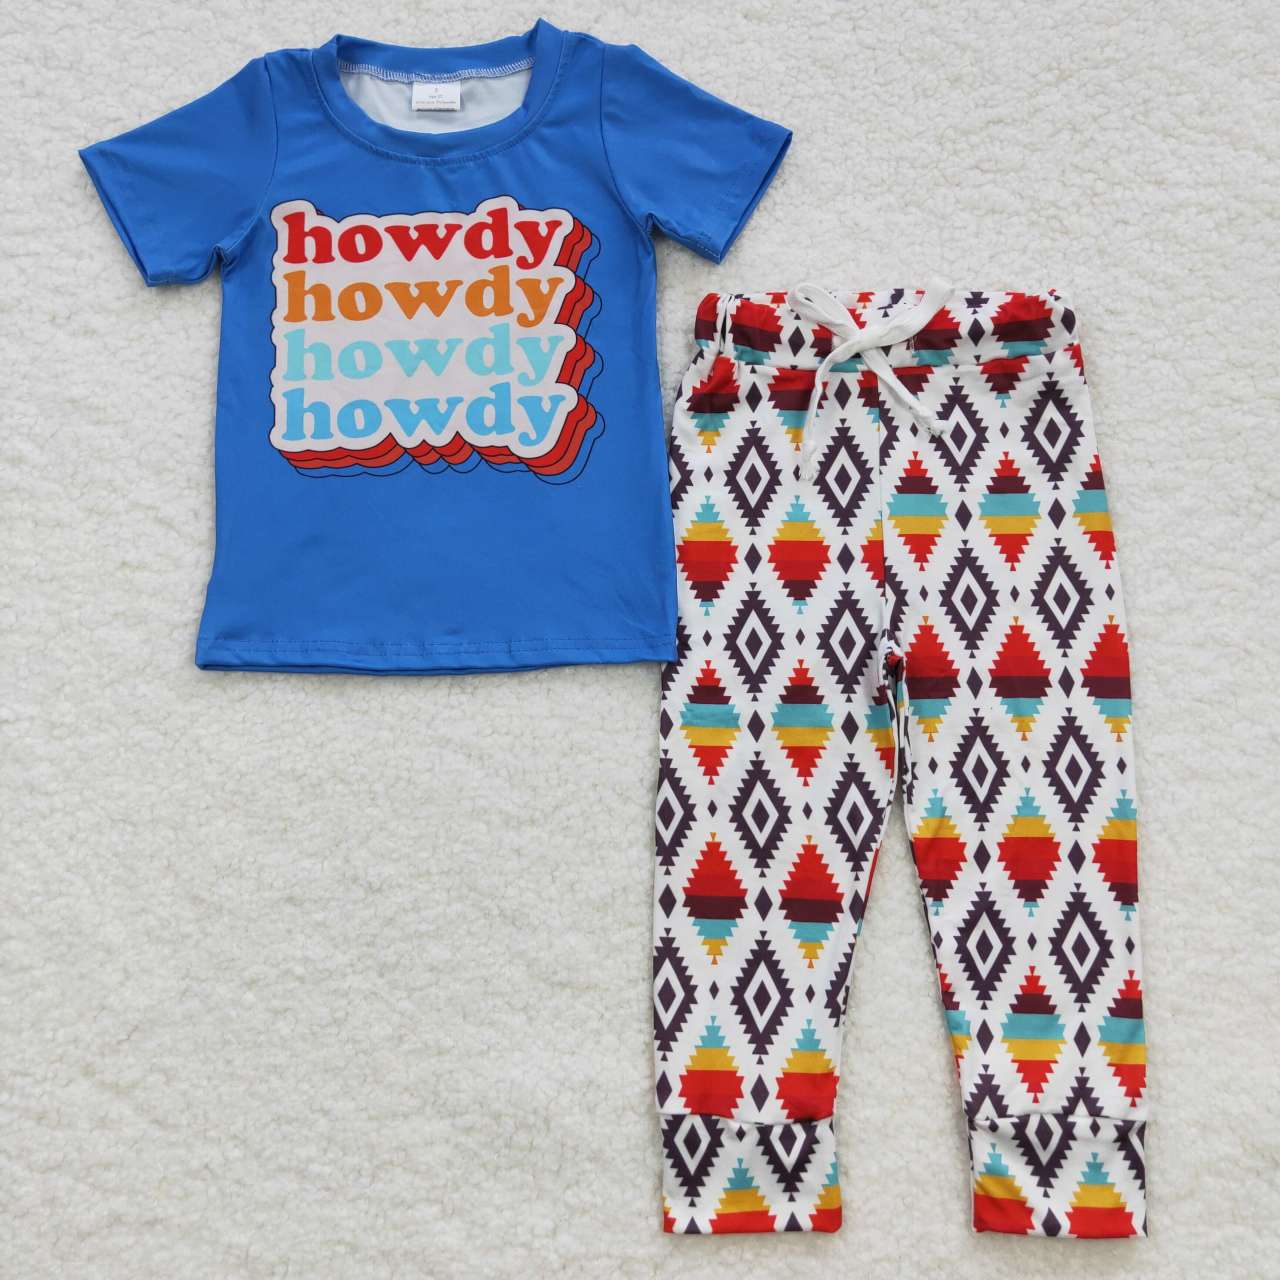 BSPO0137 Baby Boy Short Sleeves Howdy Shirt Aztec Pants Western Outfit